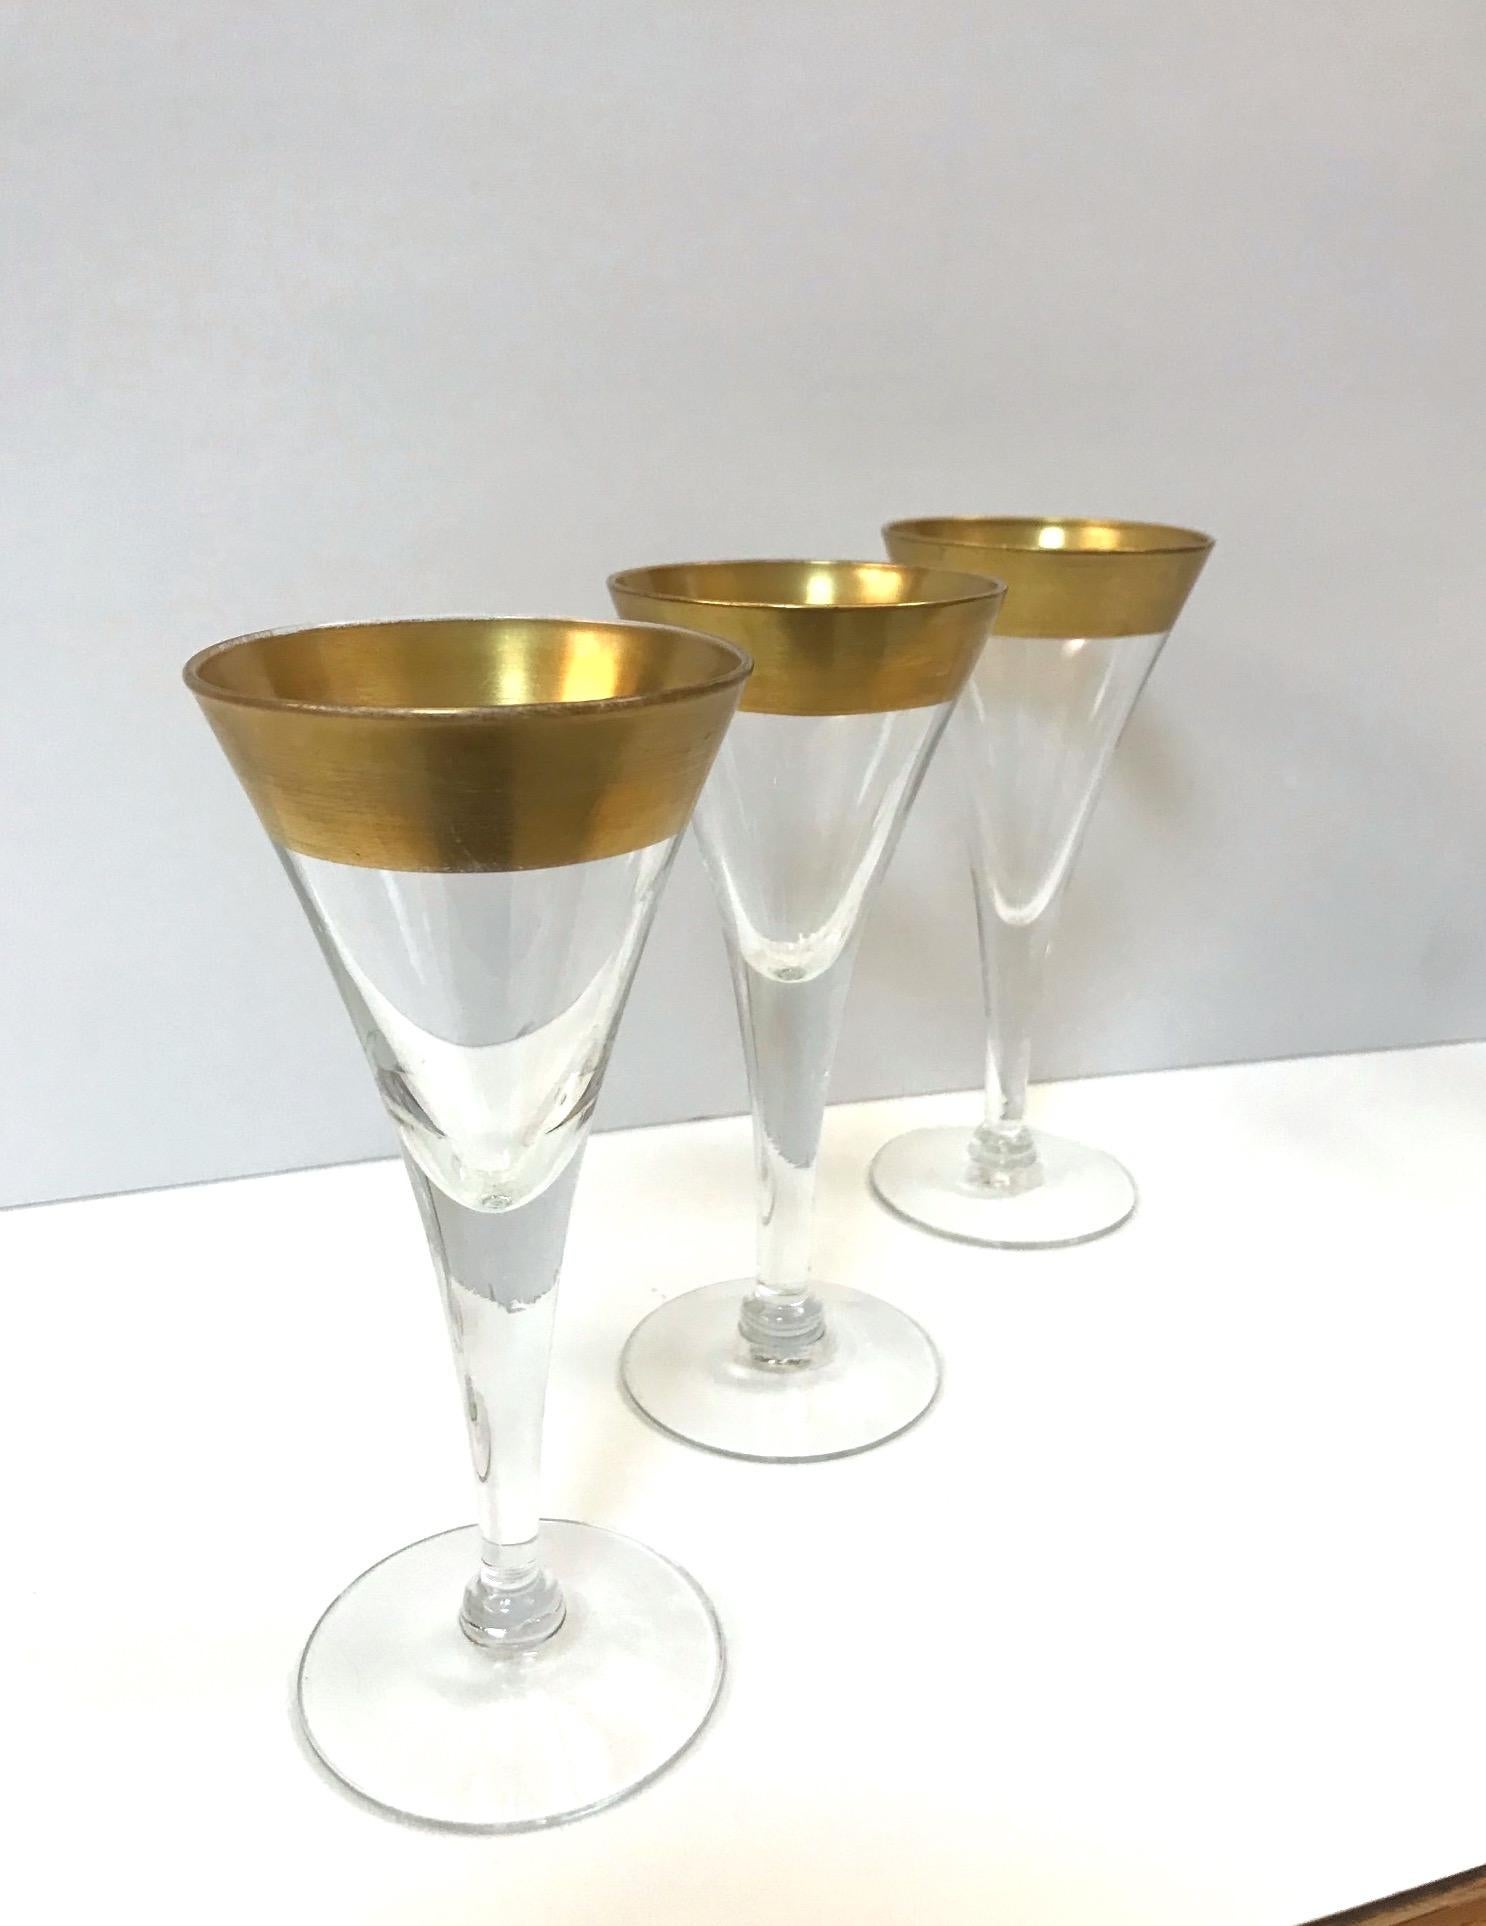 Hand-Crafted Set of Six Crystal Gold Rim Cordial Glasses by Dorothy Thorpe